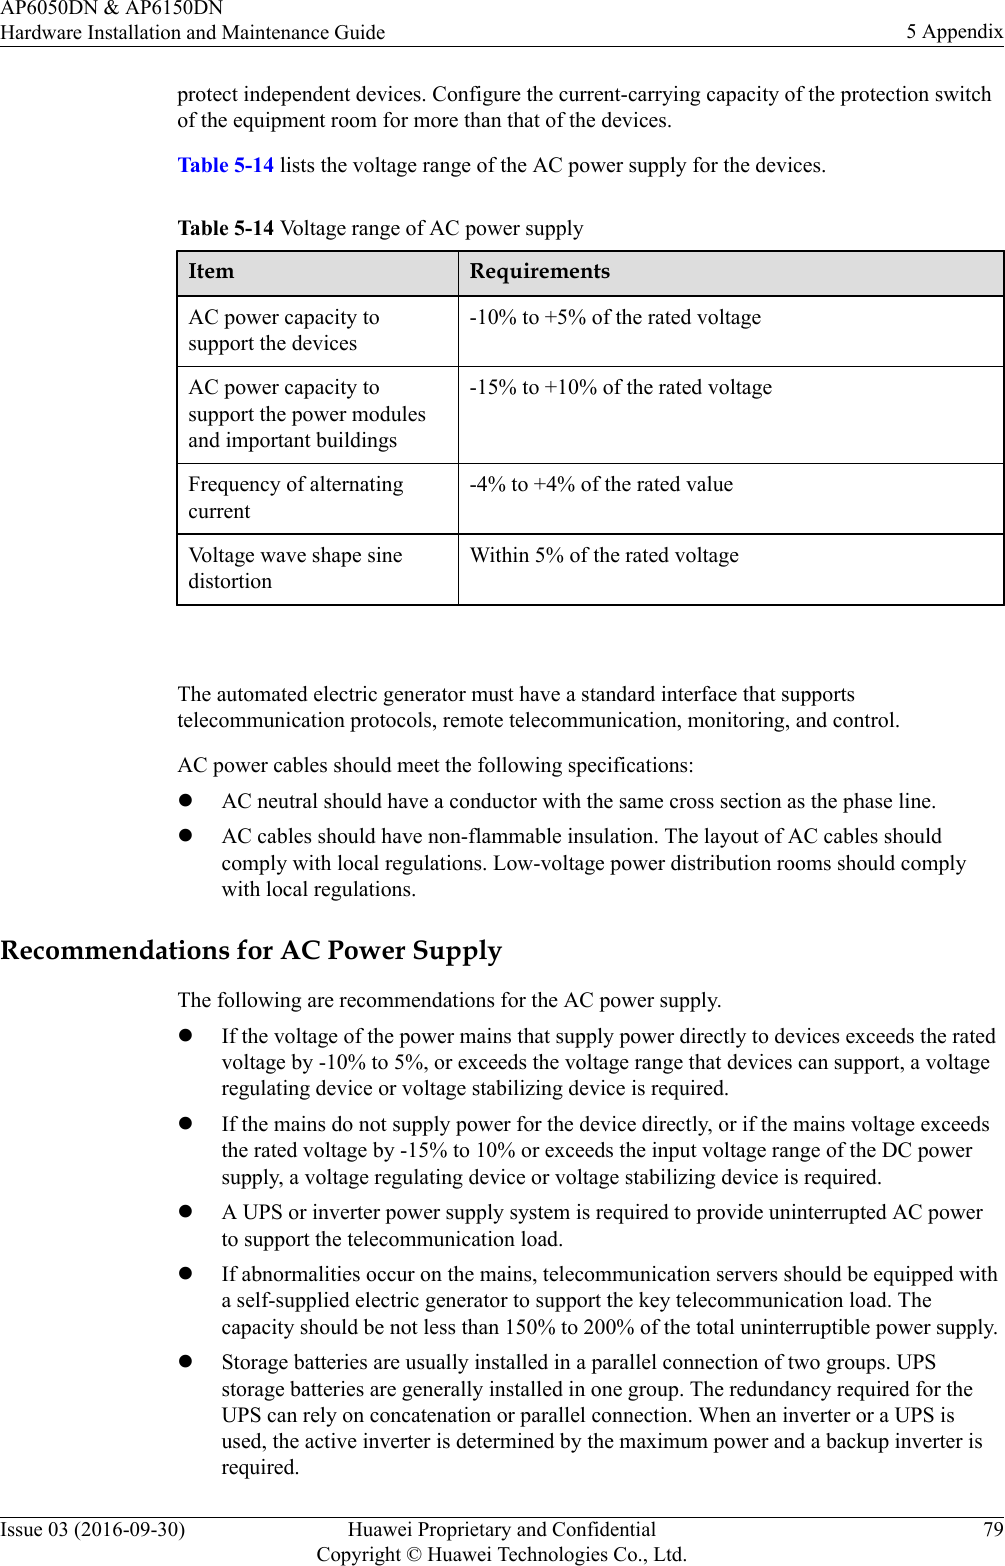 protect independent devices. Configure the current-carrying capacity of the protection switchof the equipment room for more than that of the devices.Table 5-14 lists the voltage range of the AC power supply for the devices.Table 5-14 Voltage range of AC power supplyItem RequirementsAC power capacity tosupport the devices-10% to +5% of the rated voltageAC power capacity tosupport the power modulesand important buildings-15% to +10% of the rated voltageFrequency of alternatingcurrent-4% to +4% of the rated valueVoltage wave shape sinedistortionWithin 5% of the rated voltage The automated electric generator must have a standard interface that supportstelecommunication protocols, remote telecommunication, monitoring, and control.AC power cables should meet the following specifications:lAC neutral should have a conductor with the same cross section as the phase line.lAC cables should have non-flammable insulation. The layout of AC cables shouldcomply with local regulations. Low-voltage power distribution rooms should complywith local regulations.Recommendations for AC Power SupplyThe following are recommendations for the AC power supply.lIf the voltage of the power mains that supply power directly to devices exceeds the ratedvoltage by -10% to 5%, or exceeds the voltage range that devices can support, a voltageregulating device or voltage stabilizing device is required.lIf the mains do not supply power for the device directly, or if the mains voltage exceedsthe rated voltage by -15% to 10% or exceeds the input voltage range of the DC powersupply, a voltage regulating device or voltage stabilizing device is required.lA UPS or inverter power supply system is required to provide uninterrupted AC powerto support the telecommunication load.lIf abnormalities occur on the mains, telecommunication servers should be equipped witha self-supplied electric generator to support the key telecommunication load. Thecapacity should be not less than 150% to 200% of the total uninterruptible power supply.lStorage batteries are usually installed in a parallel connection of two groups. UPSstorage batteries are generally installed in one group. The redundancy required for theUPS can rely on concatenation or parallel connection. When an inverter or a UPS isused, the active inverter is determined by the maximum power and a backup inverter isrequired.AP6050DN &amp; AP6150DNHardware Installation and Maintenance Guide 5 AppendixIssue 03 (2016-09-30) Huawei Proprietary and ConfidentialCopyright © Huawei Technologies Co., Ltd.79